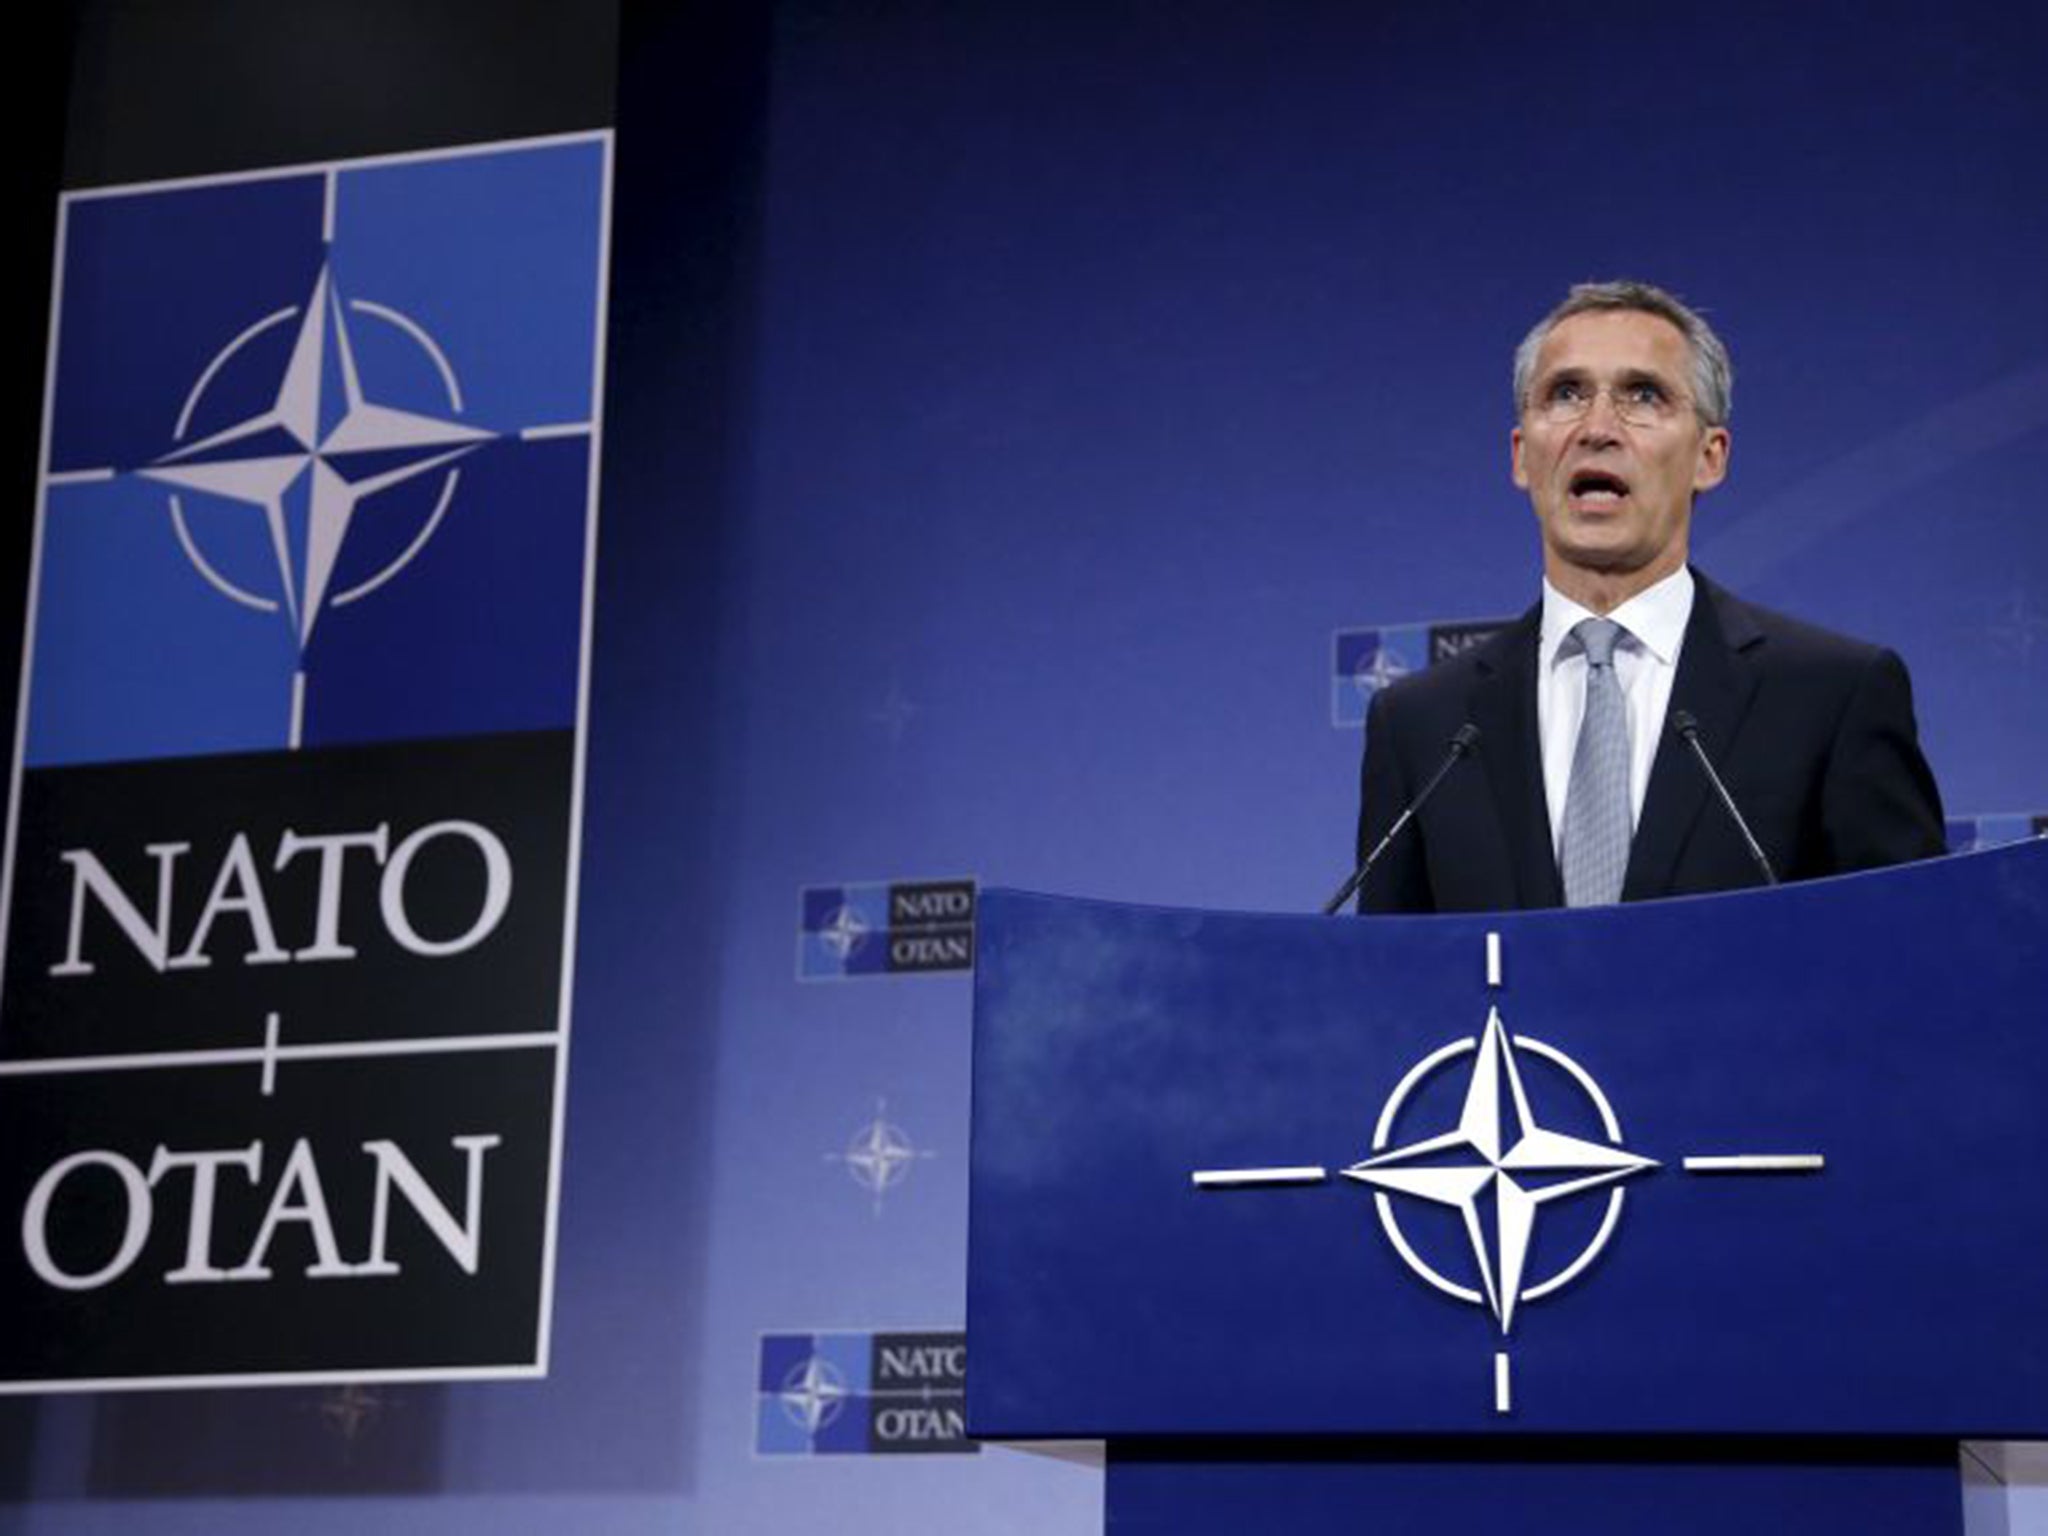 NATO Secretary General Jens Stoltenberg addresses a news conference on Thursday. NATO has said it is prepared to send troops to Turkey to defend its ally after violations of Turkish airspace by Russian jets bombing Syria